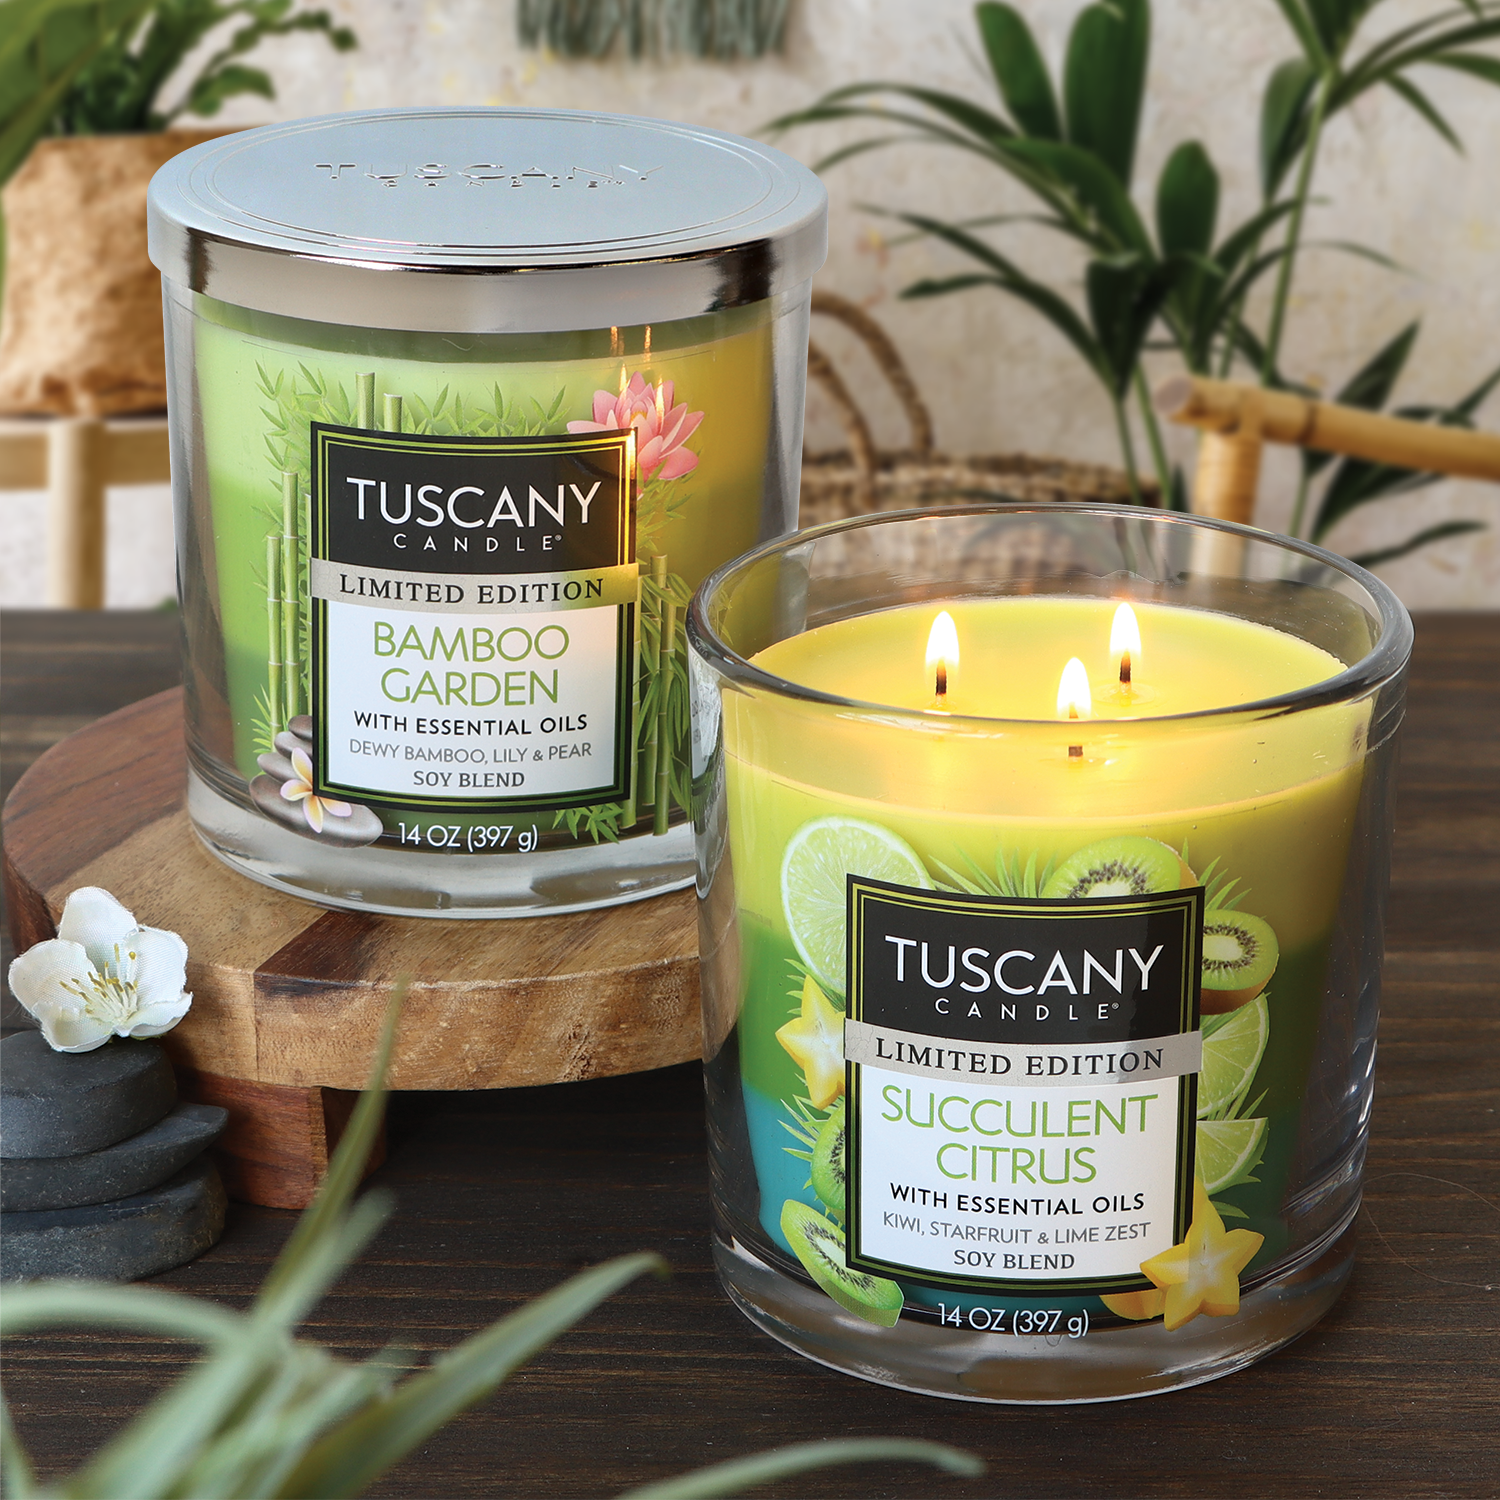 Two Tuscany Candle® SEASONAL Succulent Citrus Long-Lasting Scented Jar Candles (14 oz), one labeled "succulent citrus" and the other "bamboo garden," displayed with lit wicks on a wooden surface, surrounded by natural decor elements.